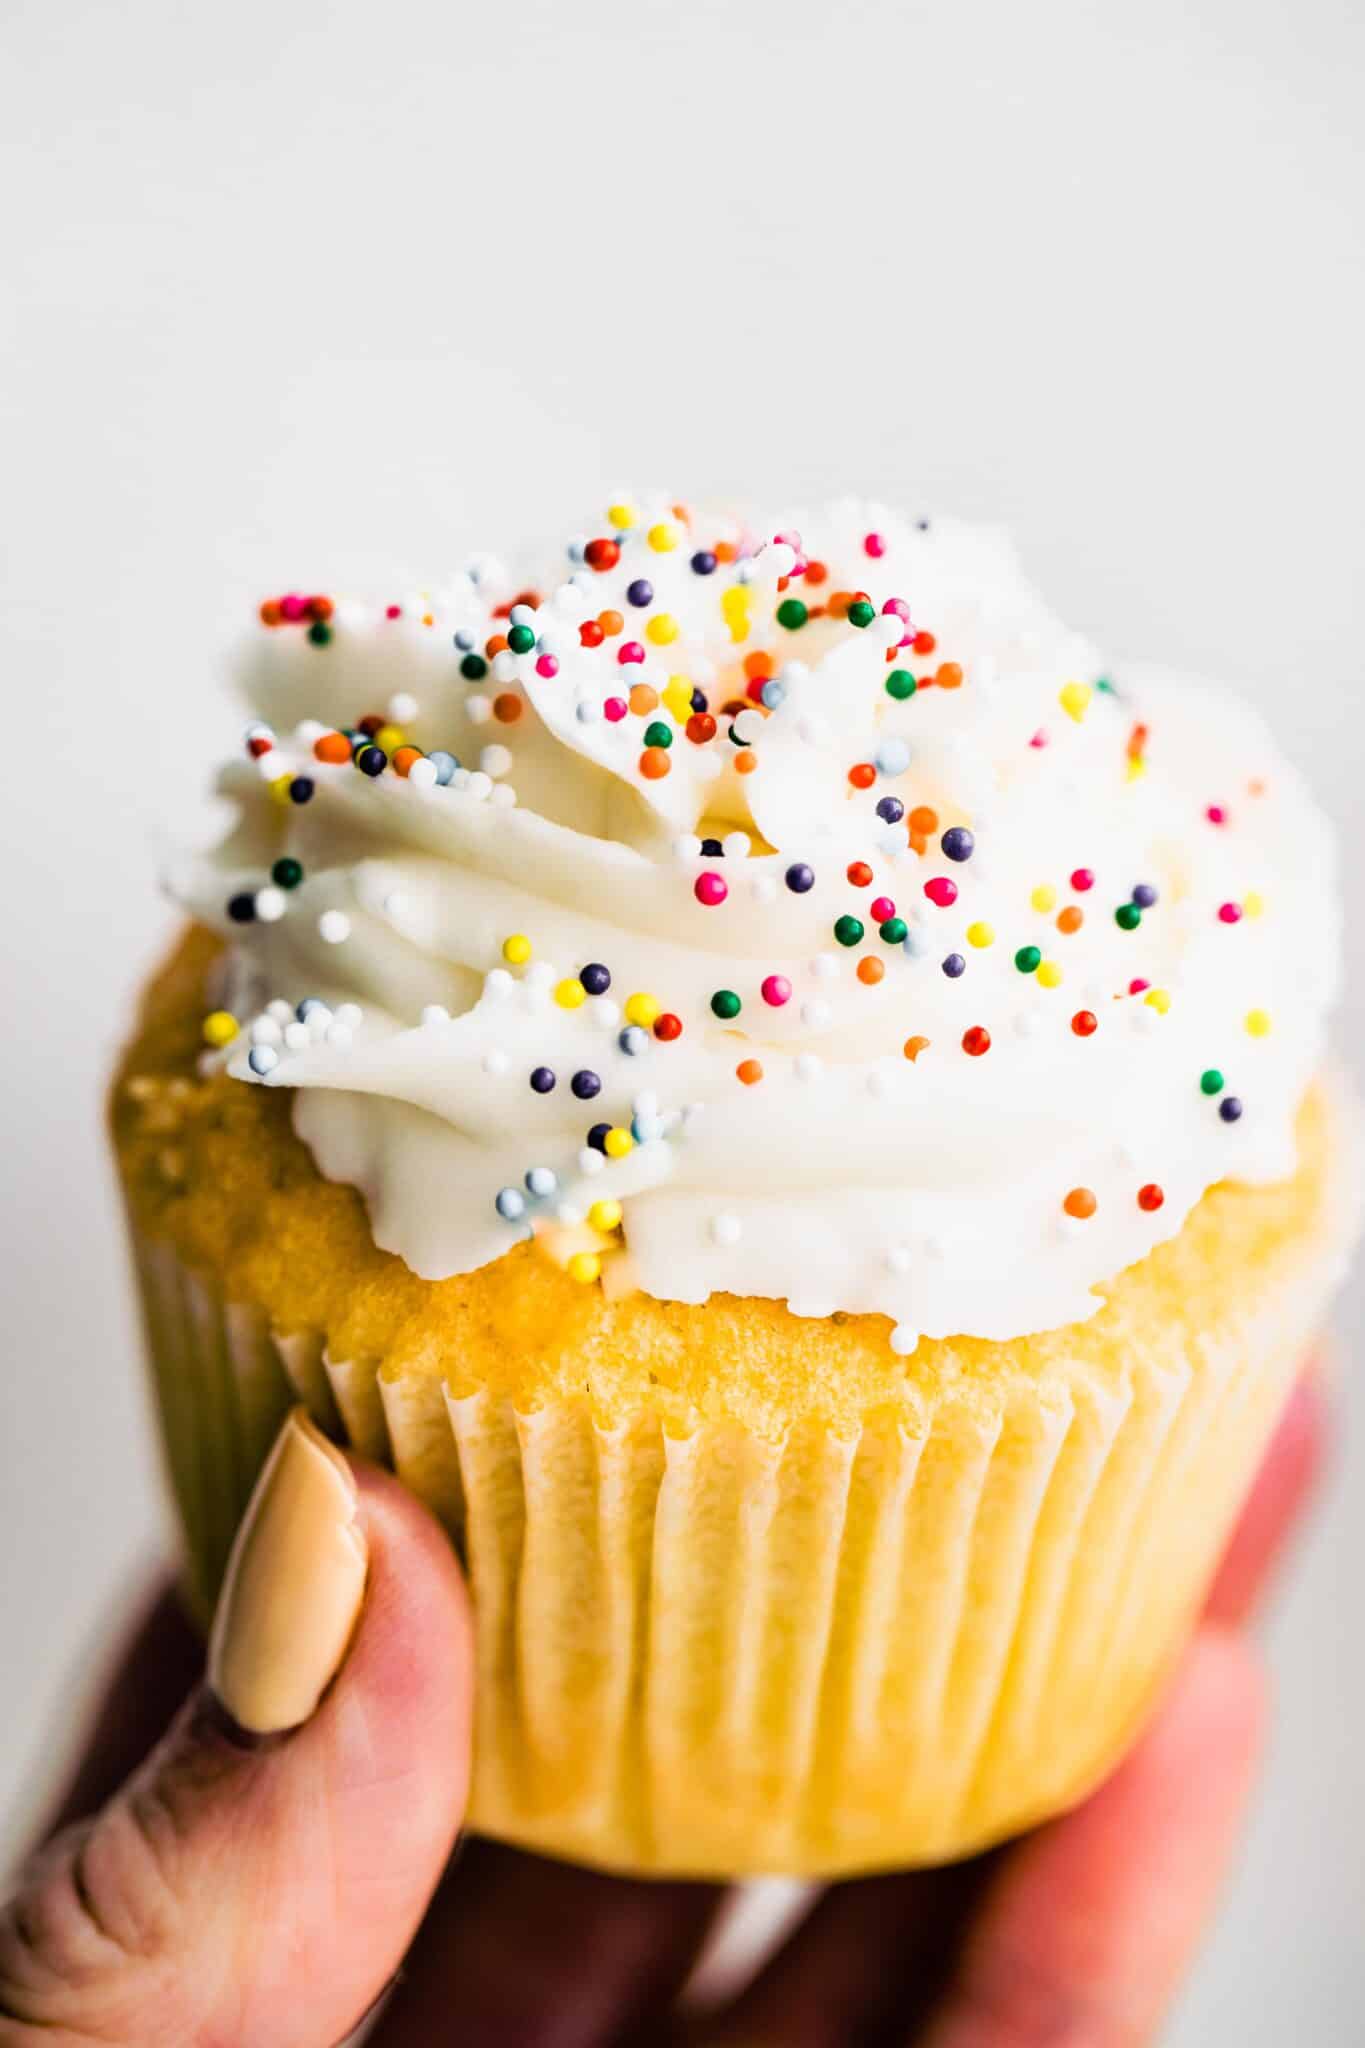 up close photo of woman's hand holding gluten free vanilla cupcake with sprinkles.